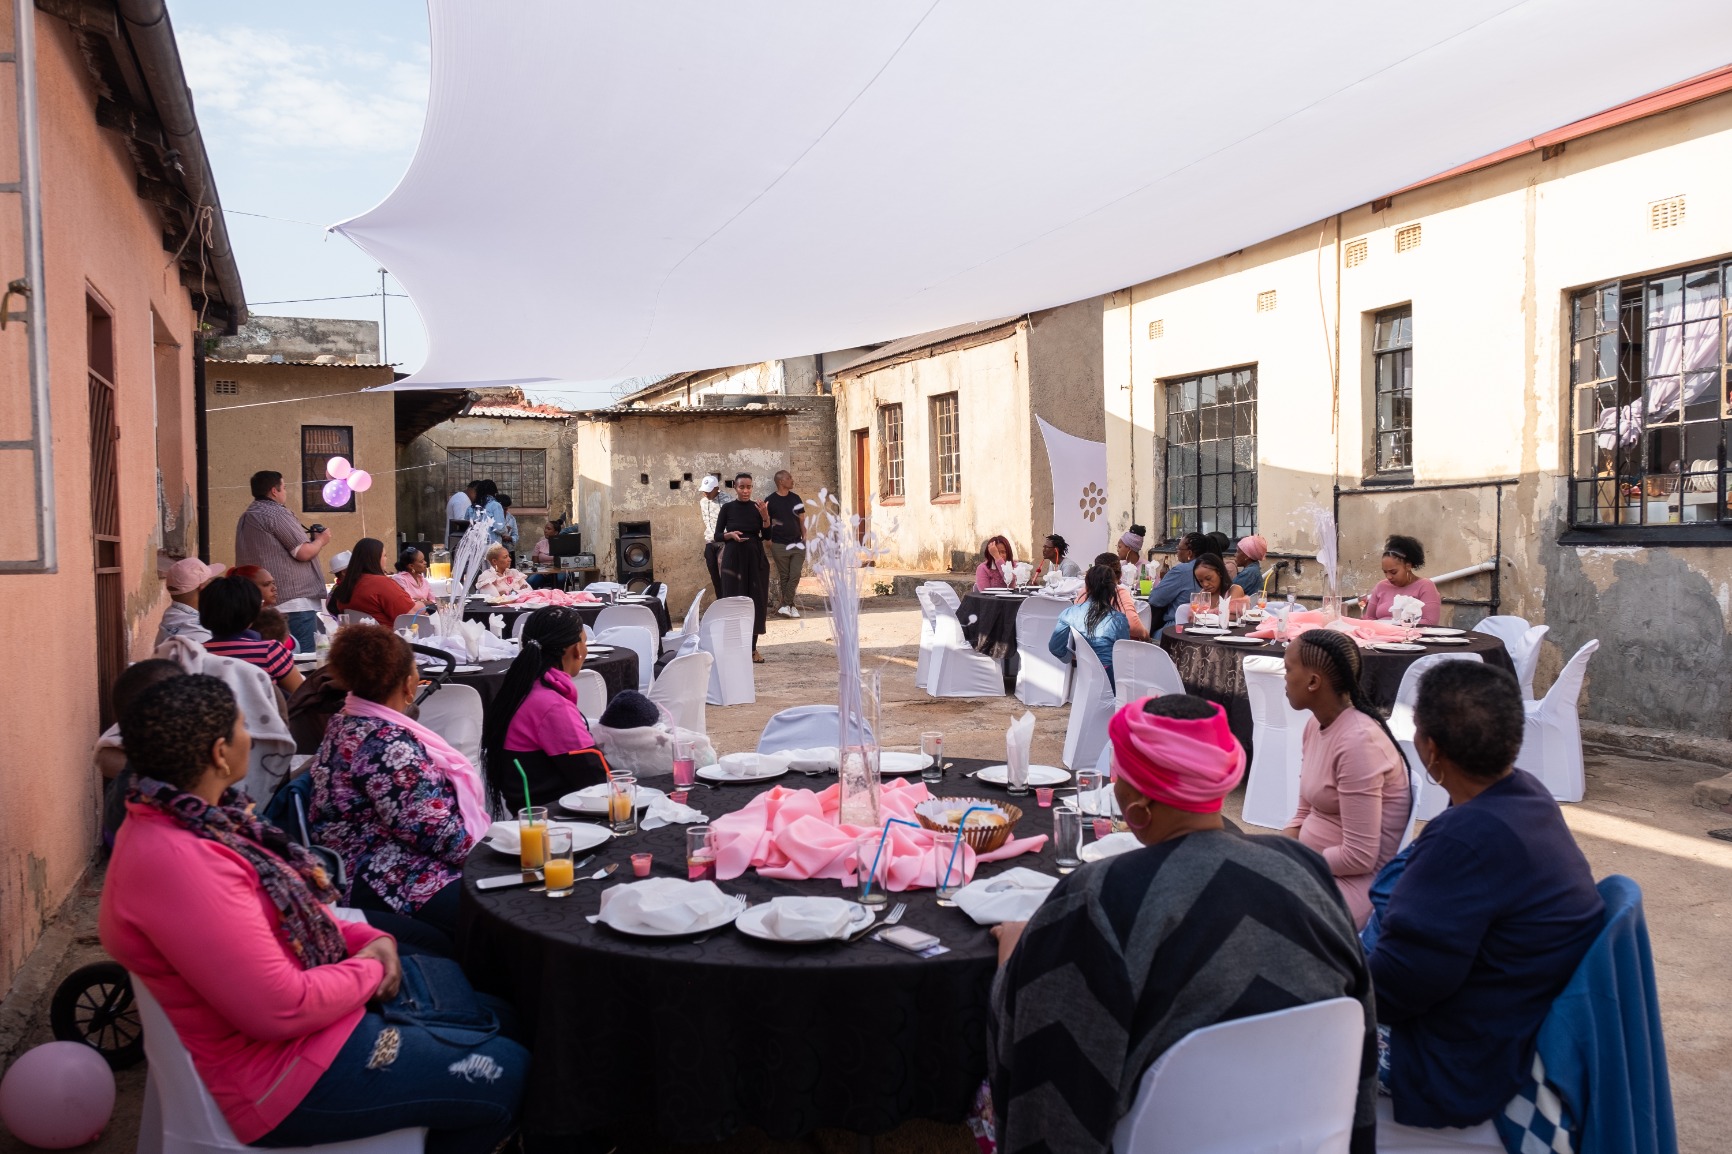 Photo of women seated at the lunch tables in the courtyard watching Khensani Jurczok-de Klerk give a talk.